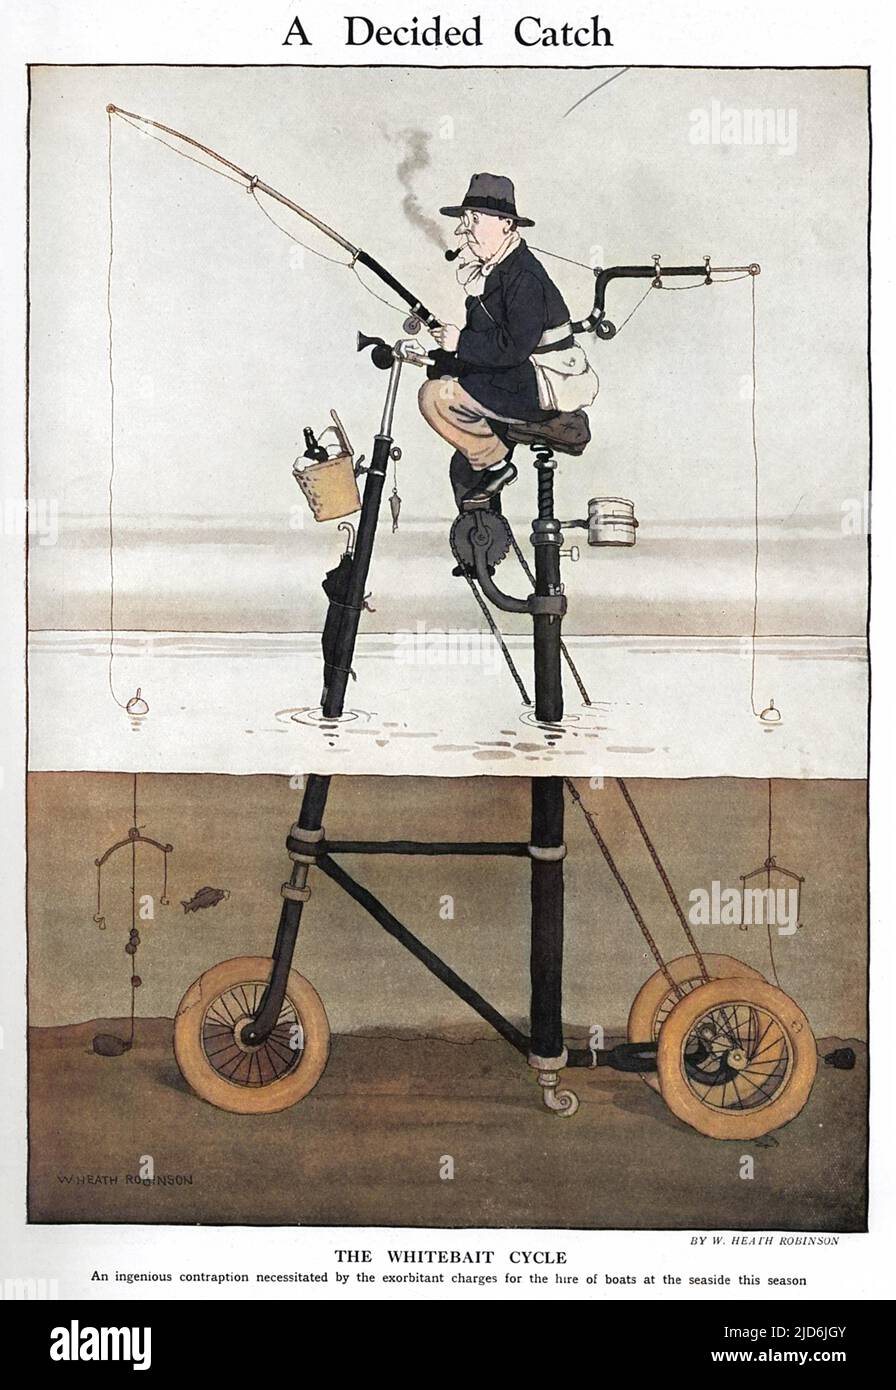 The Whitebait cycle, an ingenious contraption necessitated by the exorbitant charges for hire of boats at the seaside this season.  Another brilliant invention from the gadget king, William Heath Robinson, known for his convoluted and crazy contraptions. Colourised version of: 10583185       Date: 1927 Stock Photo